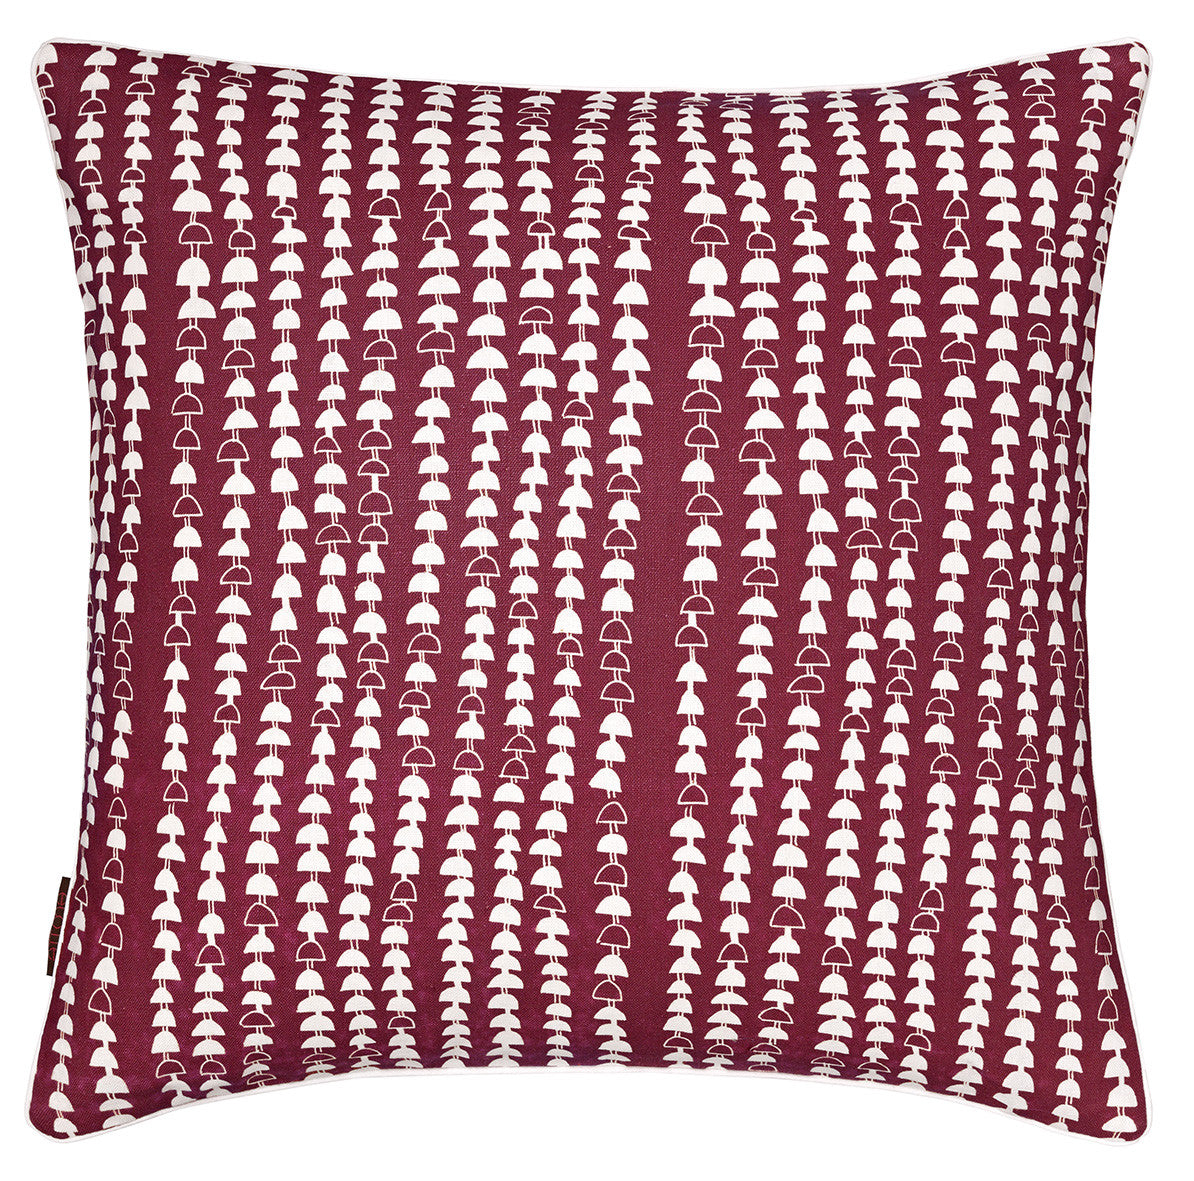 Hopi Graphic Patterned Linen Decorative Throw Pillow in Dark Vermilion Red 45x45cm 18x18"